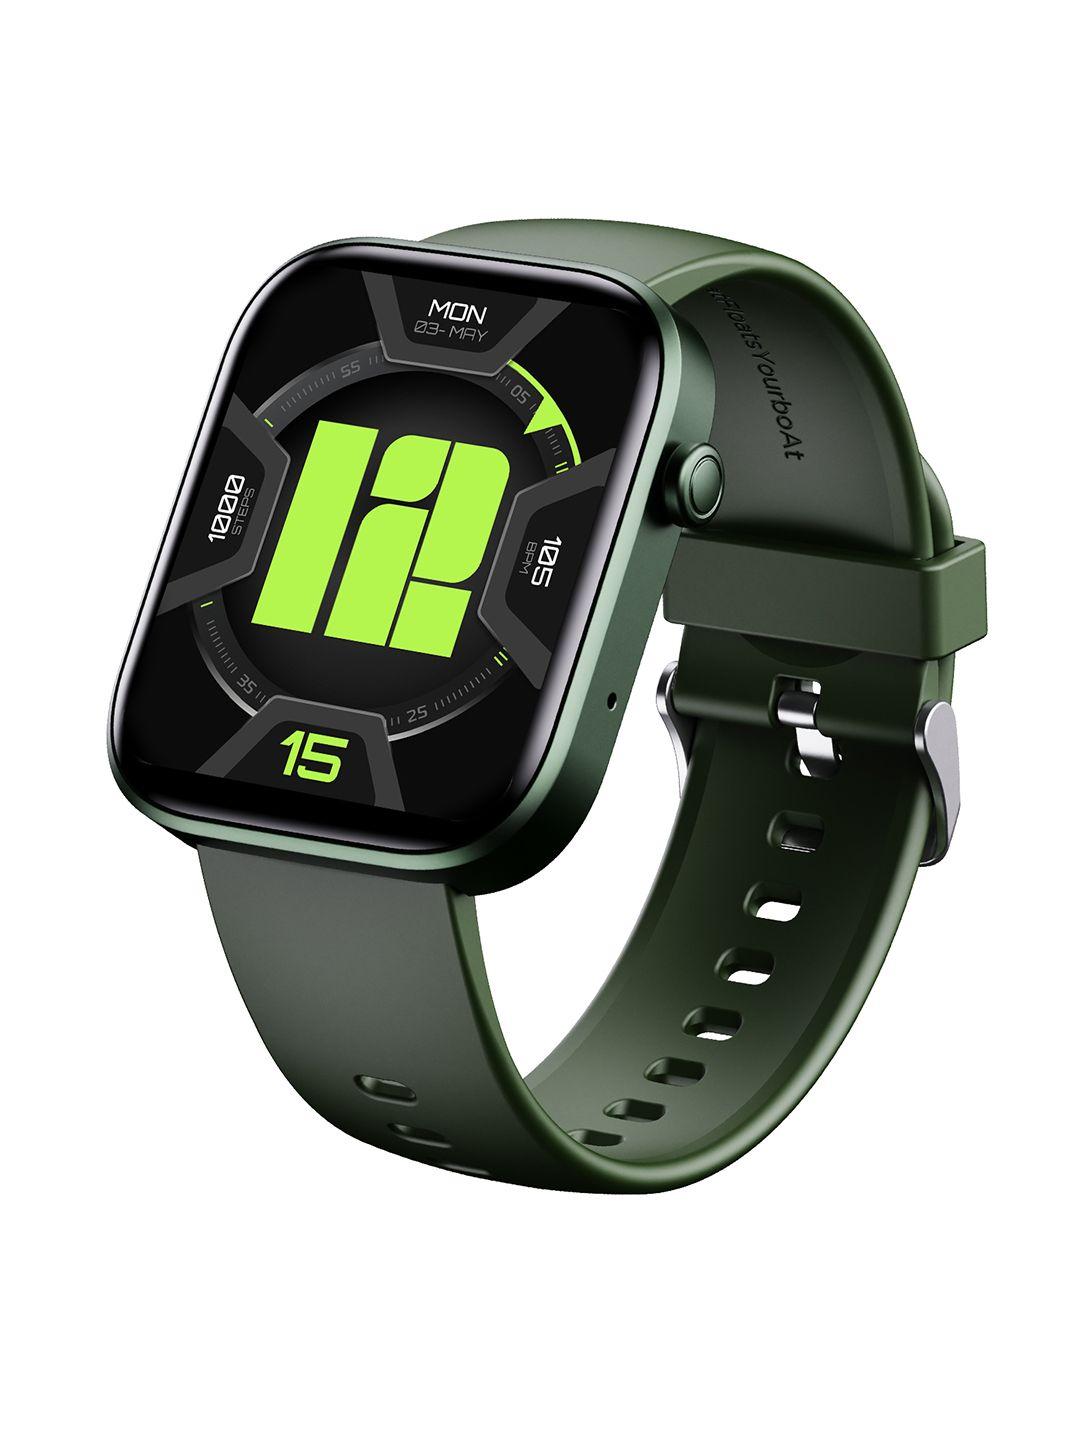 boat olive green storm call 2 1.83" hd display smart watch